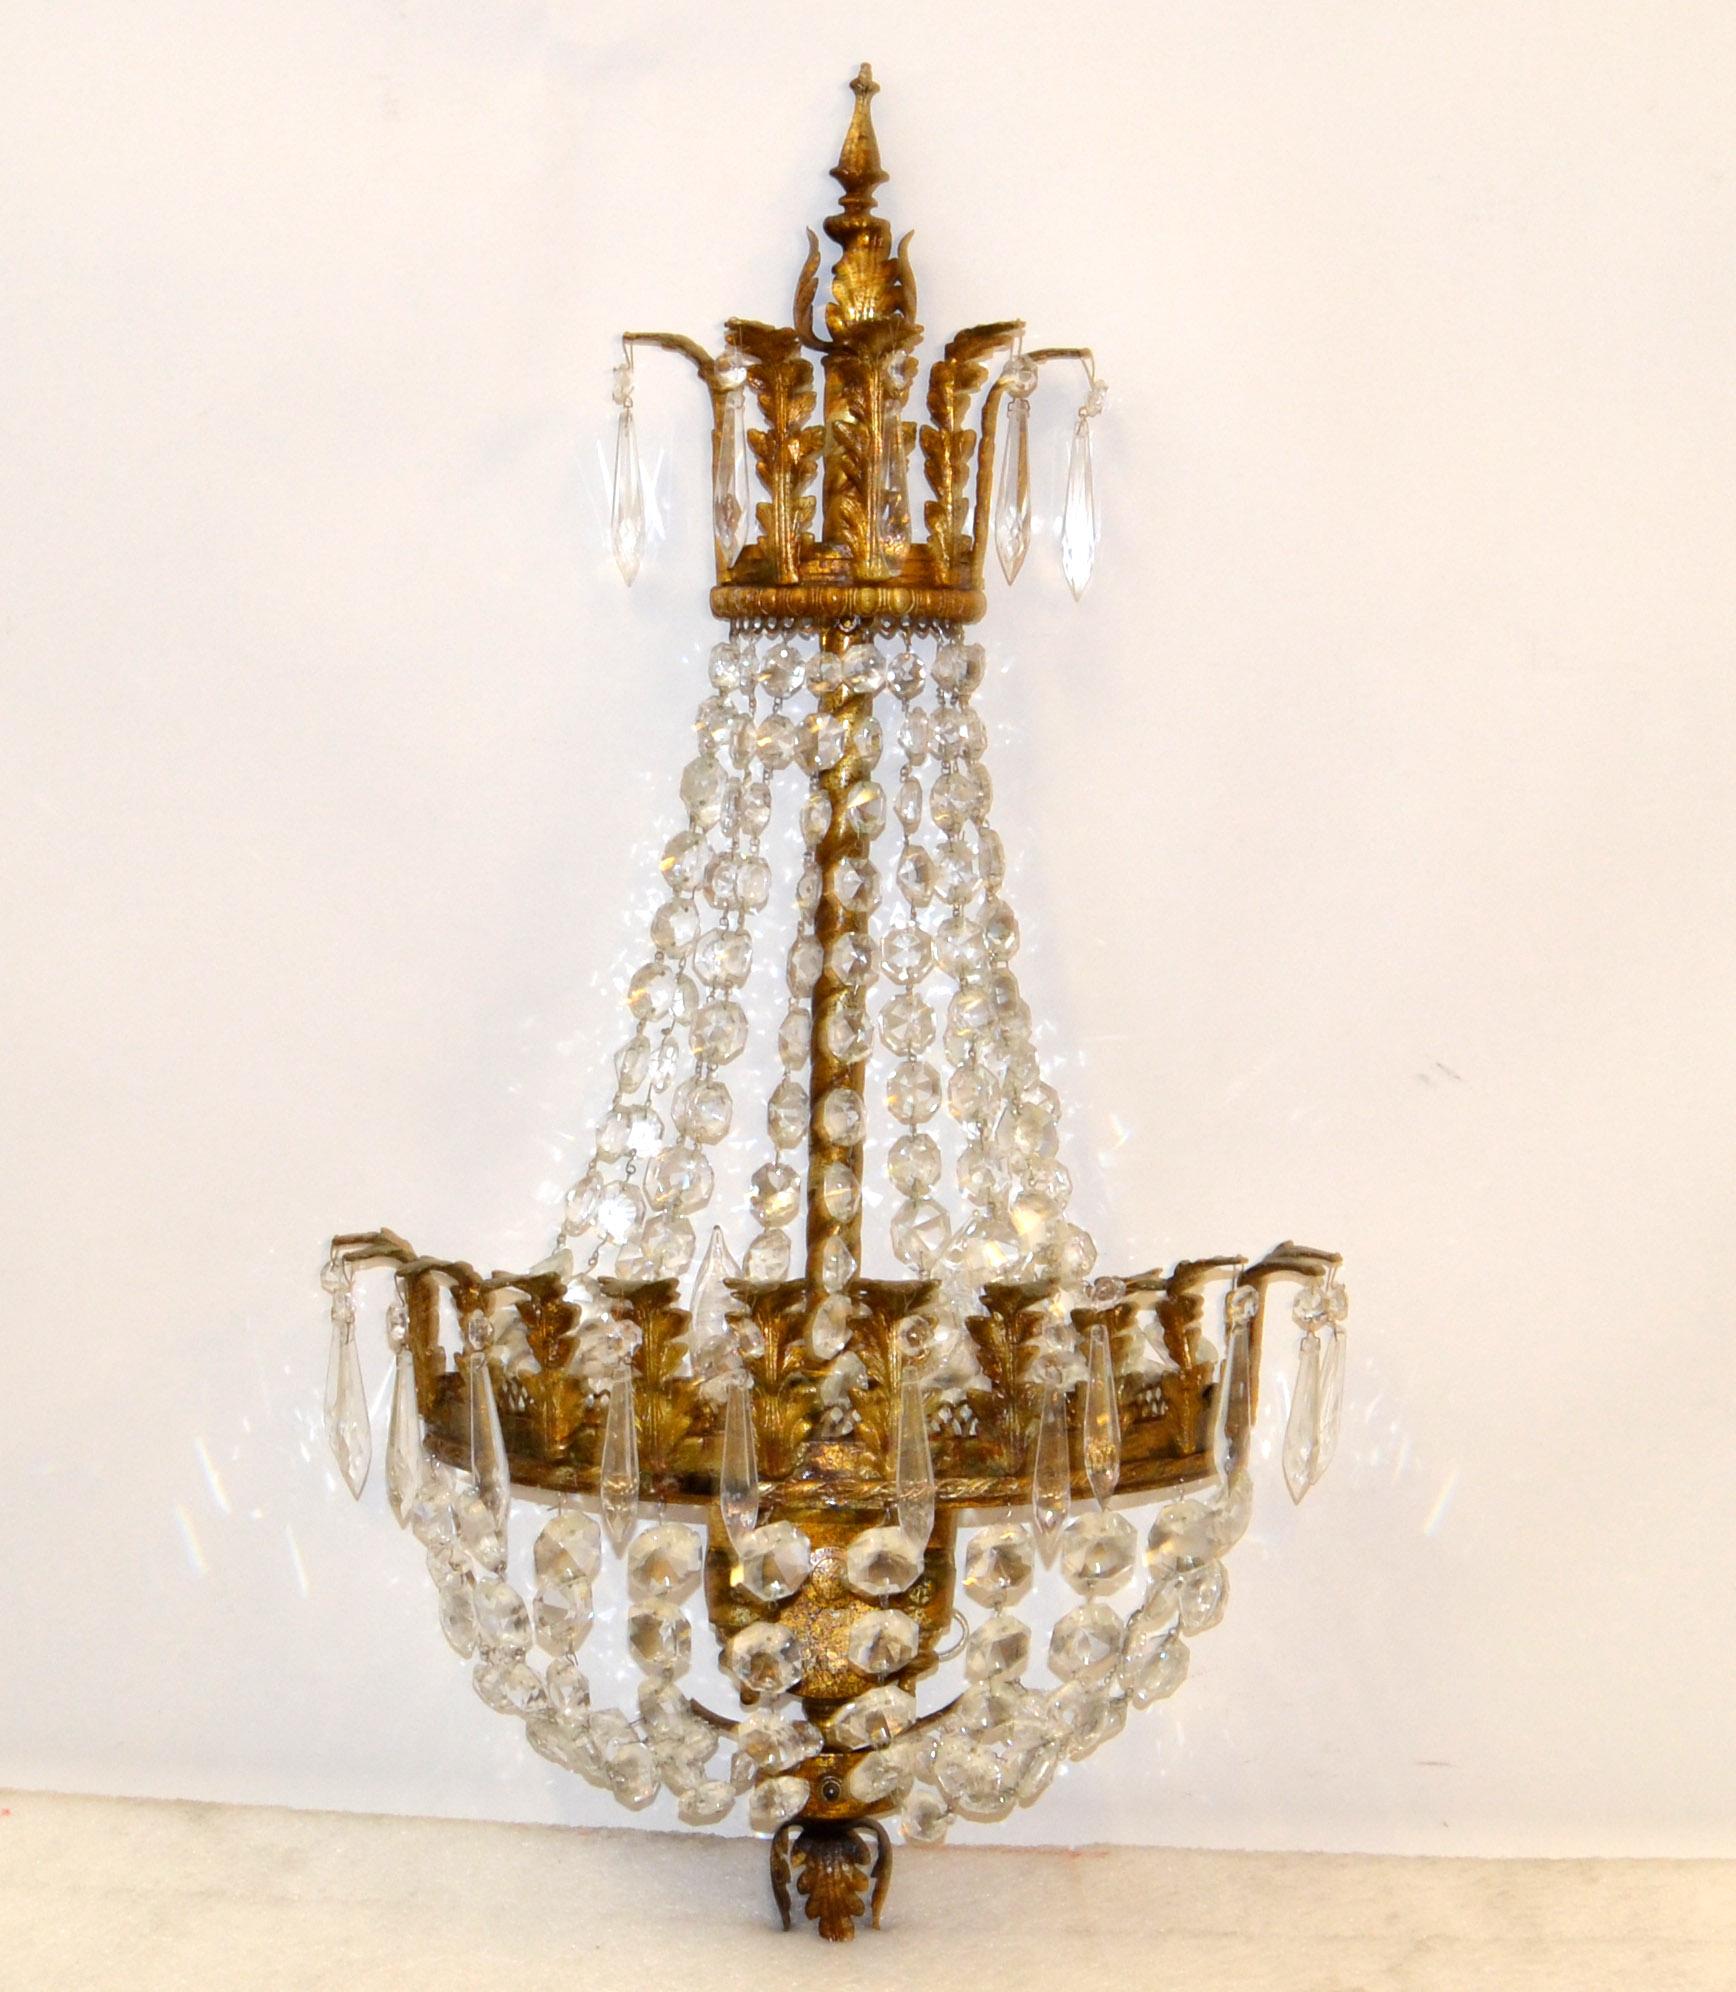 Italian Empire Style early half circle Gilt Metal, Bronze and Crystal Sconce, Wall Light with 2 Light sockets in the globe center. 
US Rewiring and takes 2 candelabra light bulbs max. 40 watts / 120V.
In fully restored condition and ready for